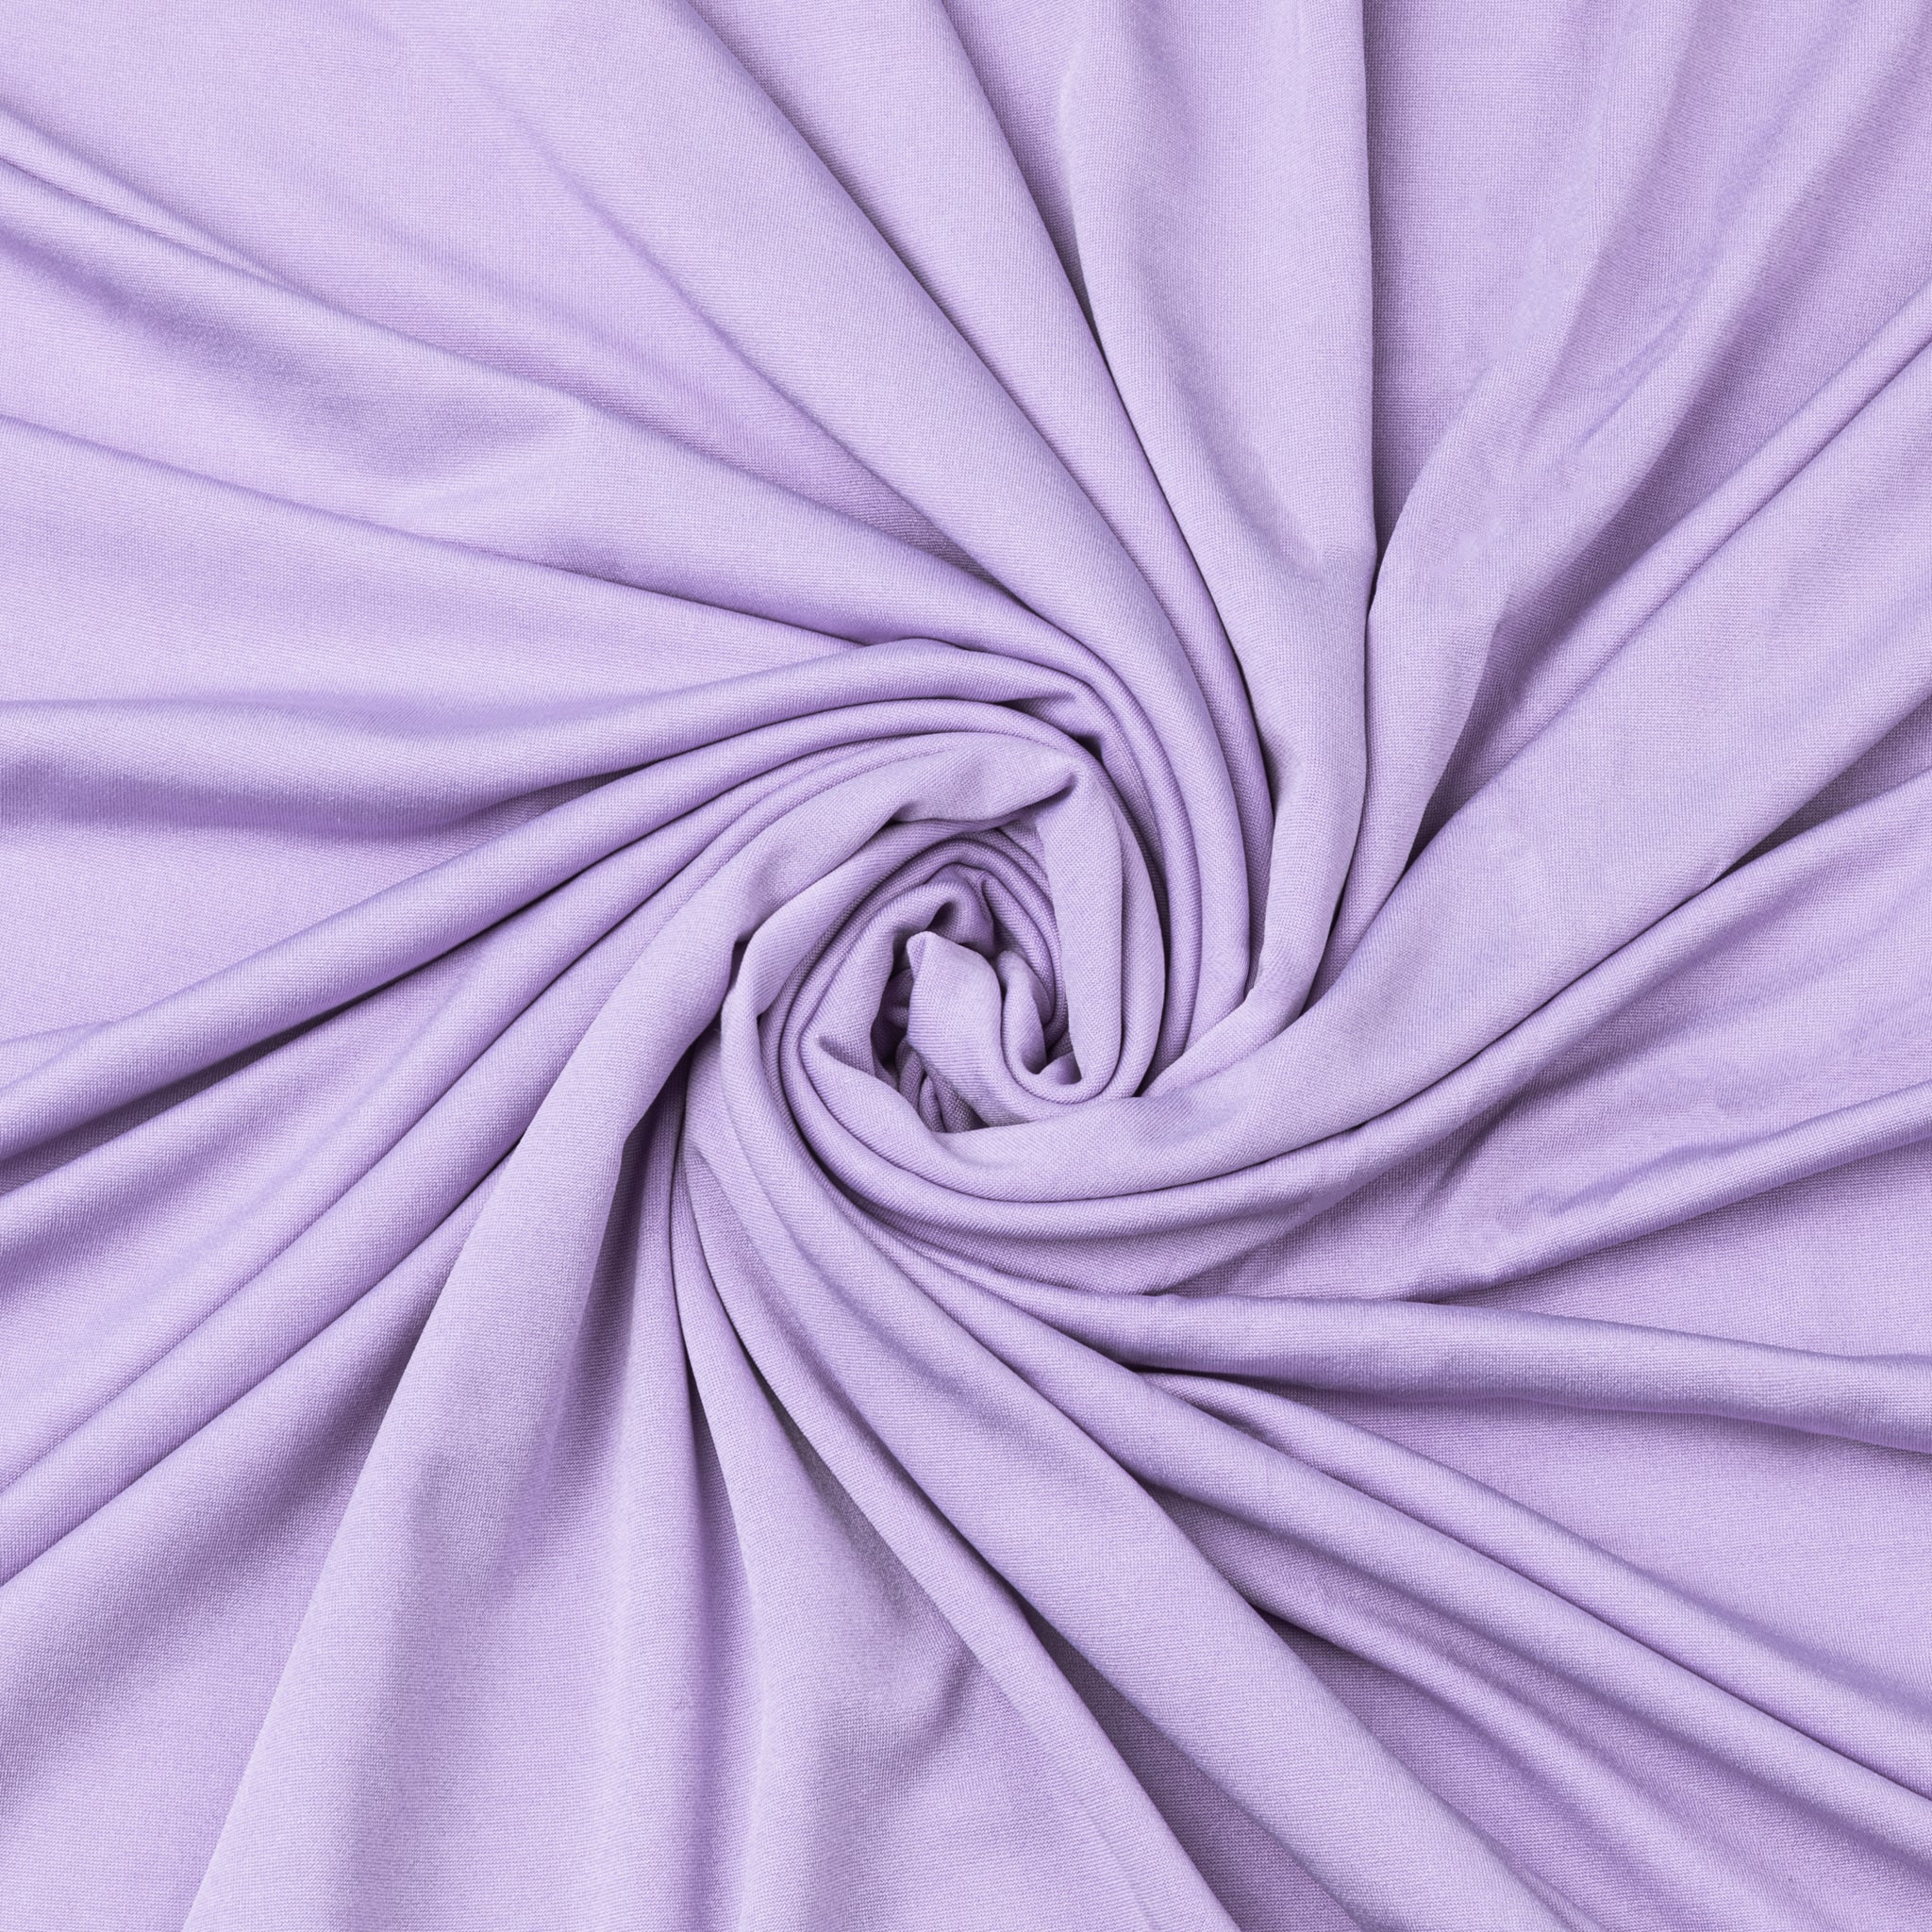  Stretch Crepe Fabric - Versatile Polyester Cloth by The Yard  with 2-Way Stretch - Ideal for Dresses, Gowns, Pants, Drapes, and Backdrops  - 1 Yard (Fuchsia) : Arts, Crafts & Sewing